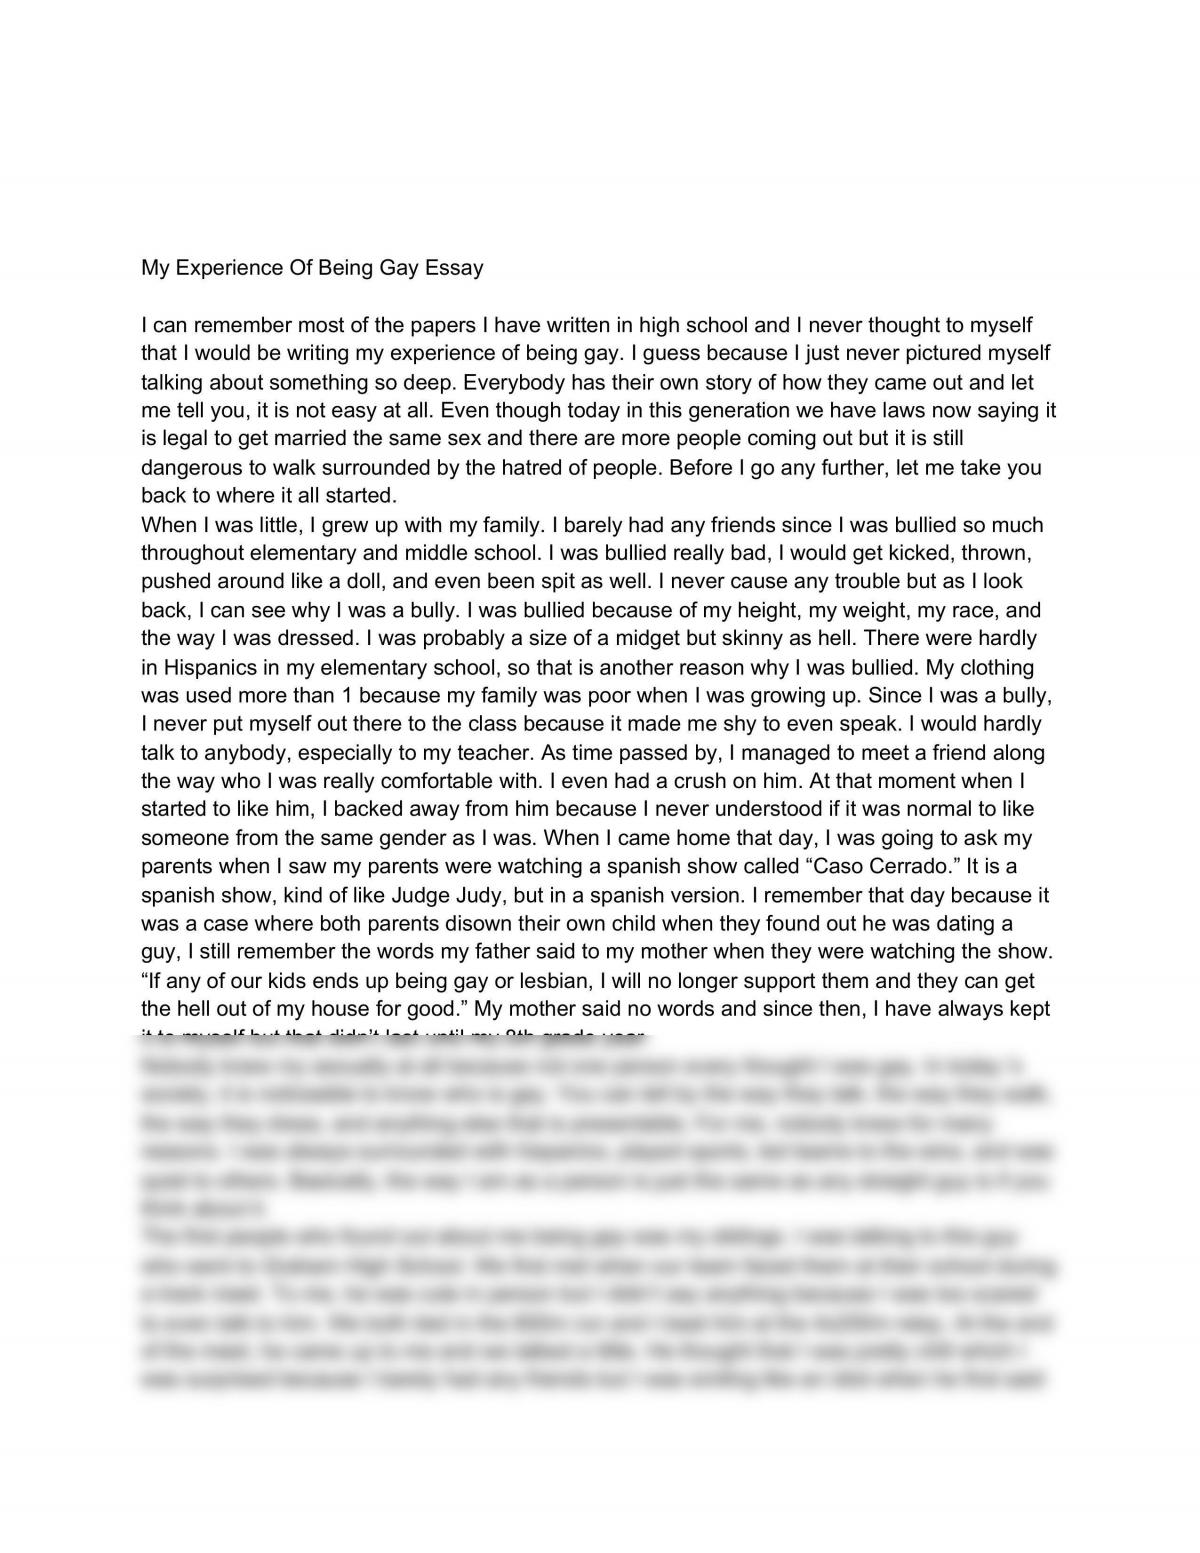 My Experience of Being Gay Essay - Page 1